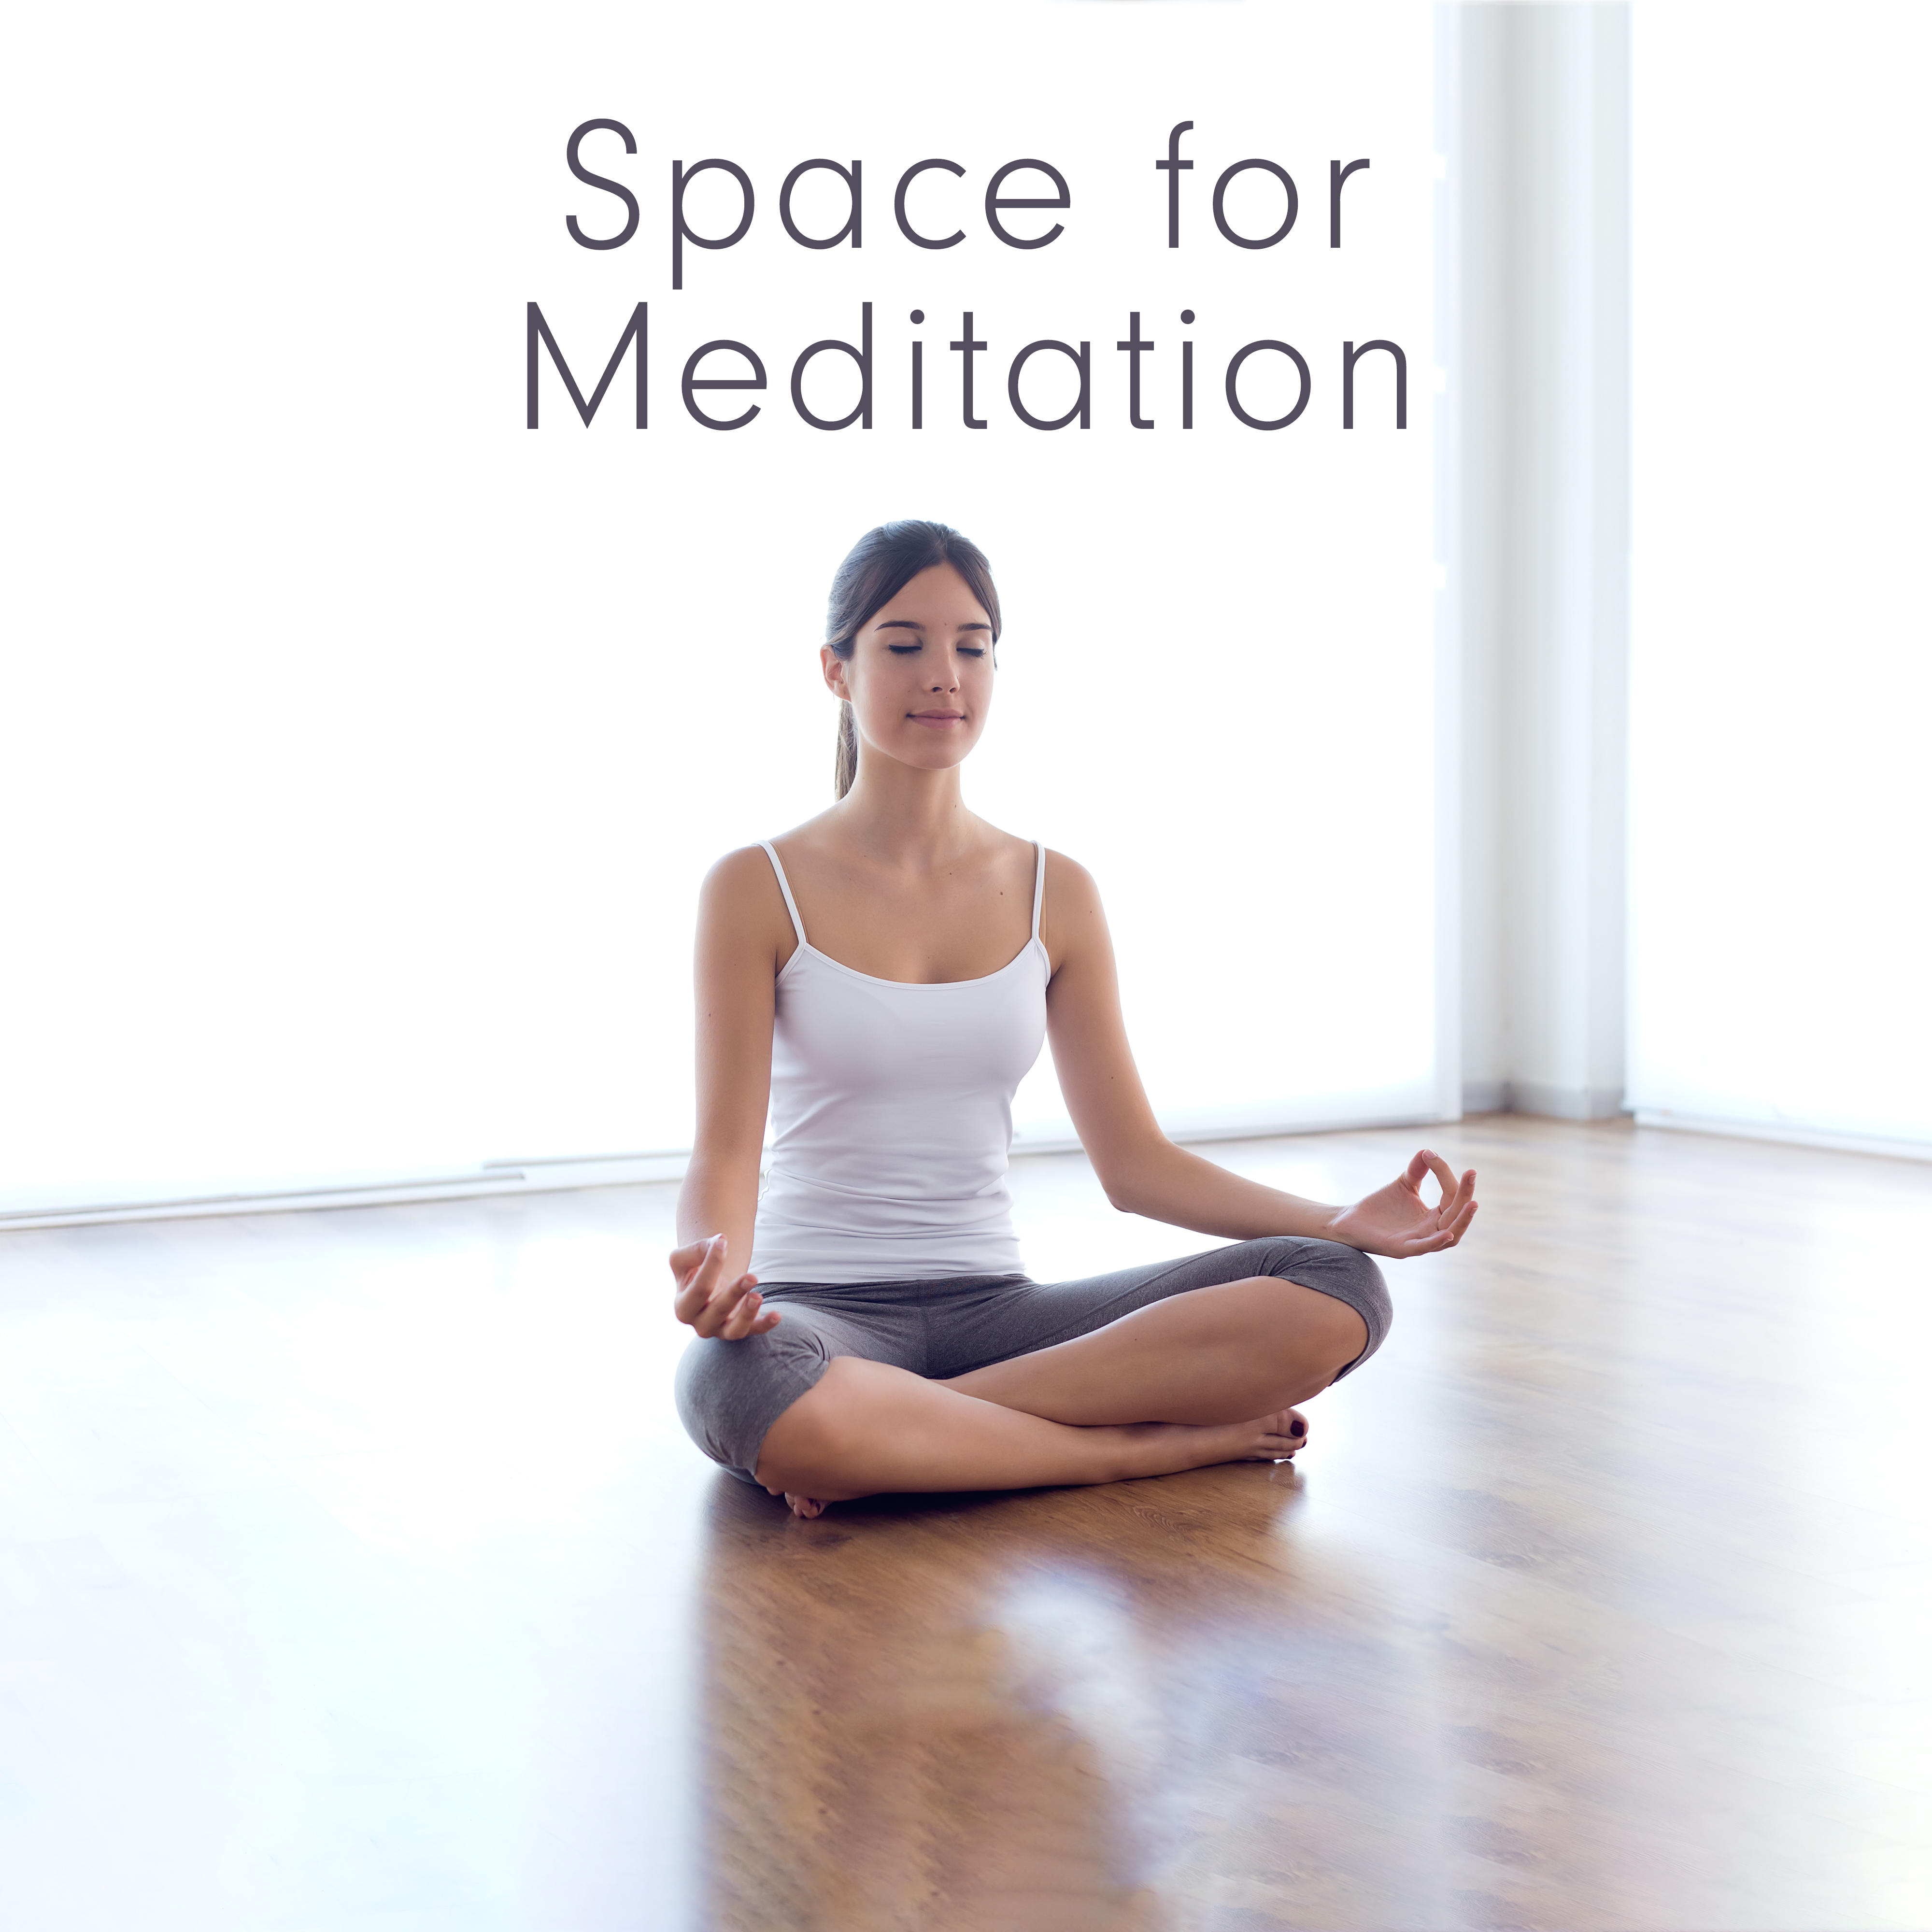 Space for Meditation